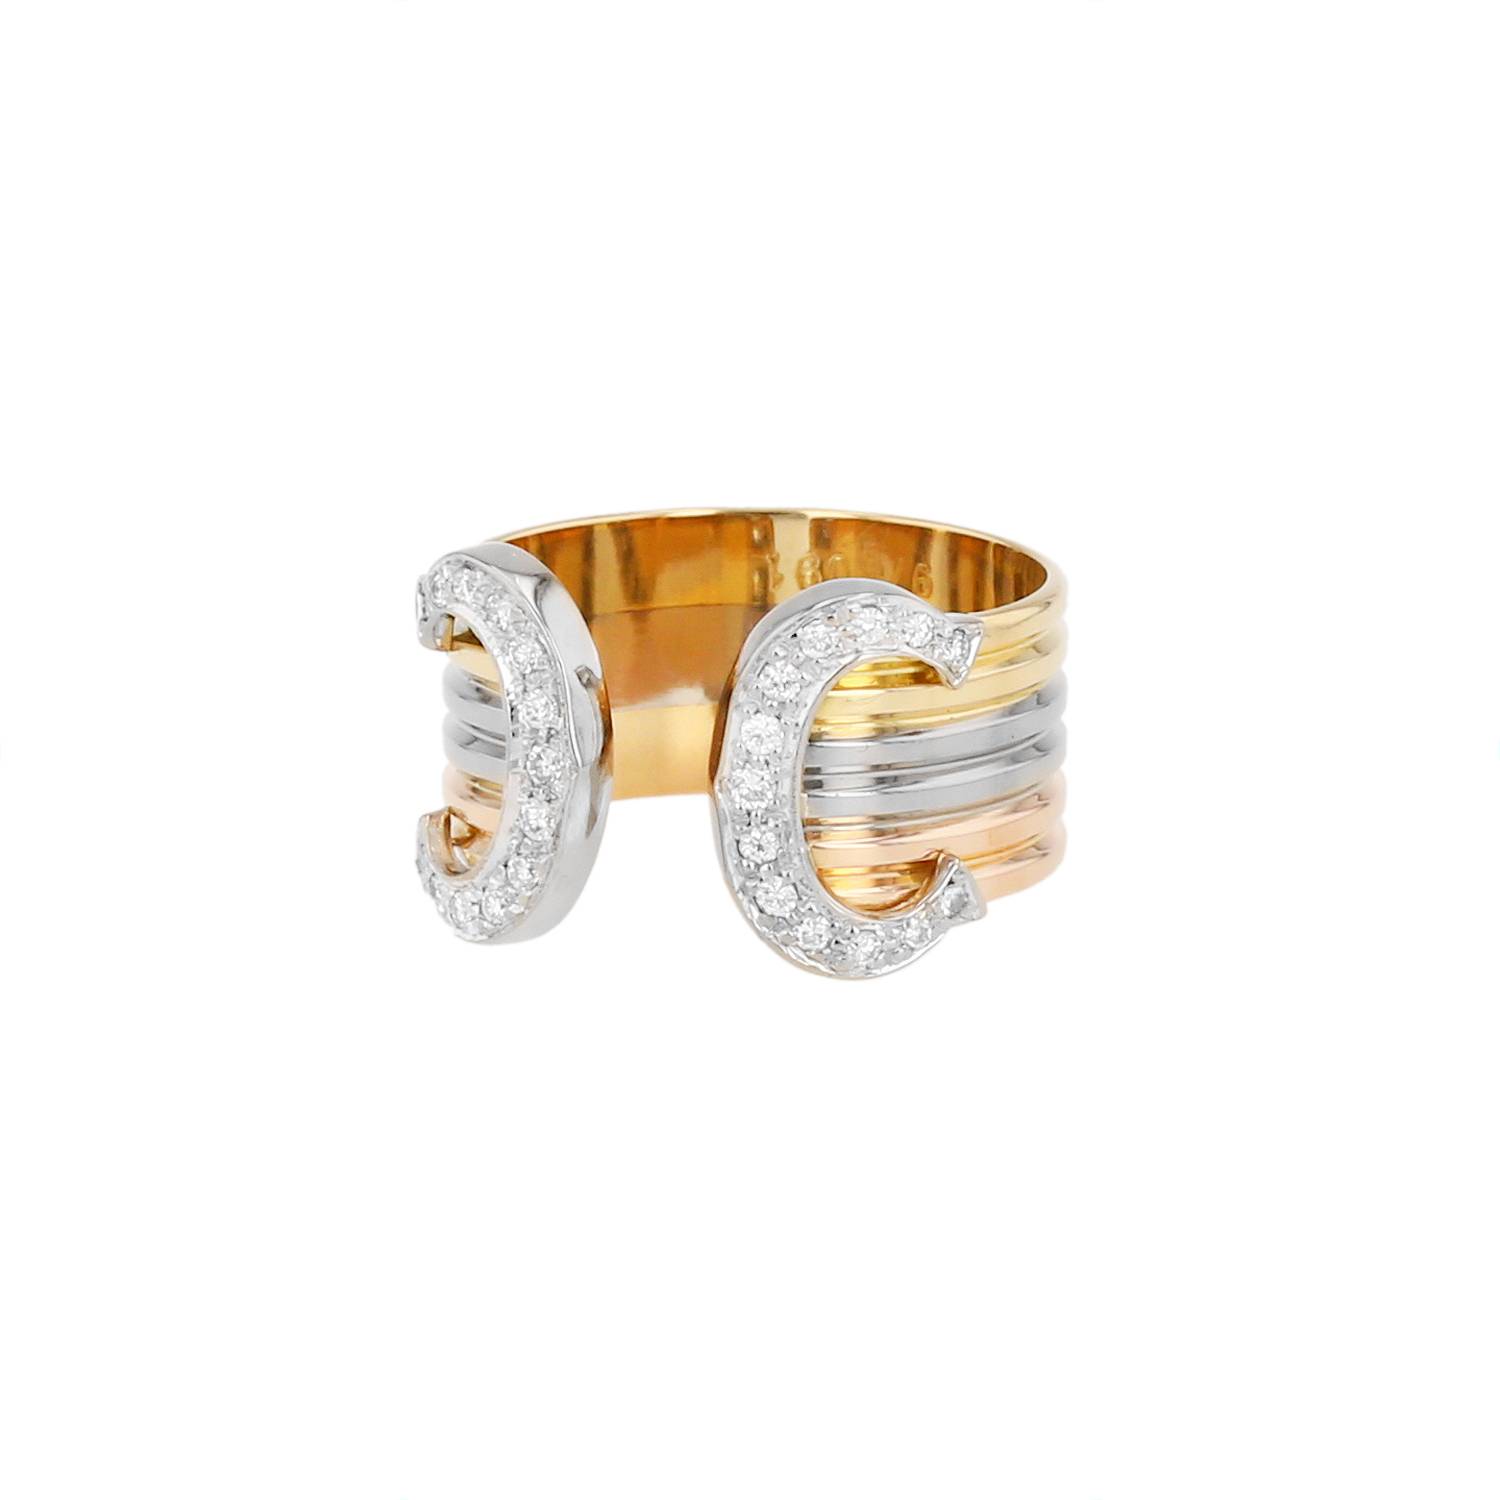 C De Large Model Ring In 3 Golds And Diamonds